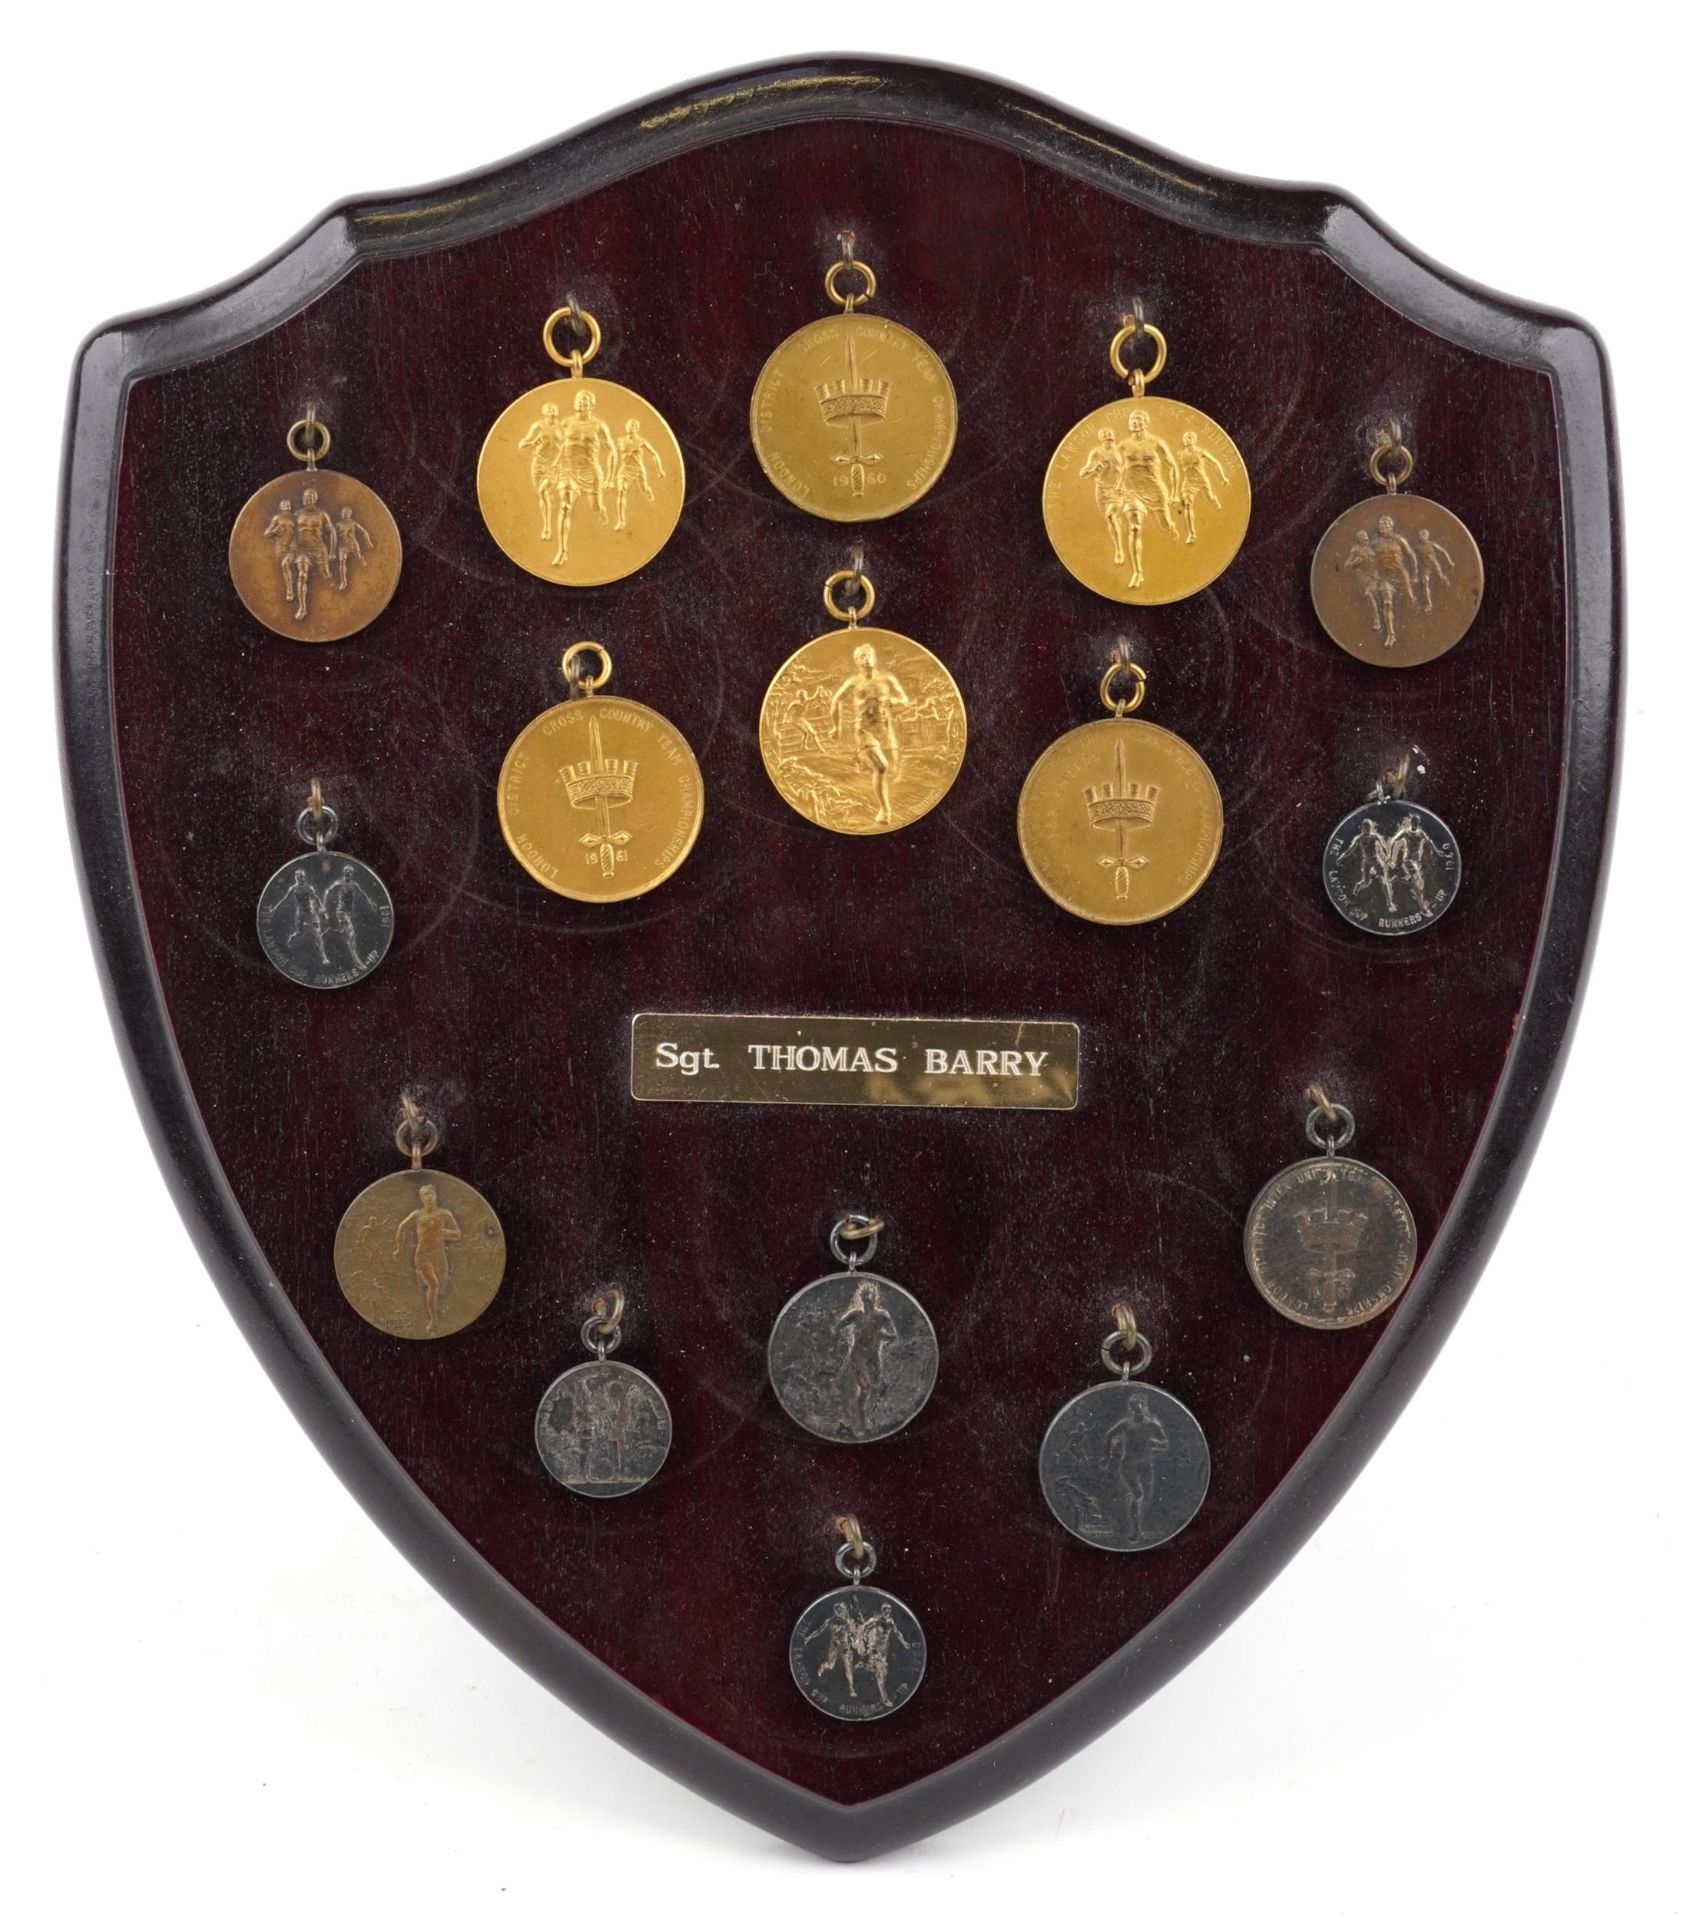 Collection of military interest athletics medals relating to Sergeant Thomas Barry arranged in a